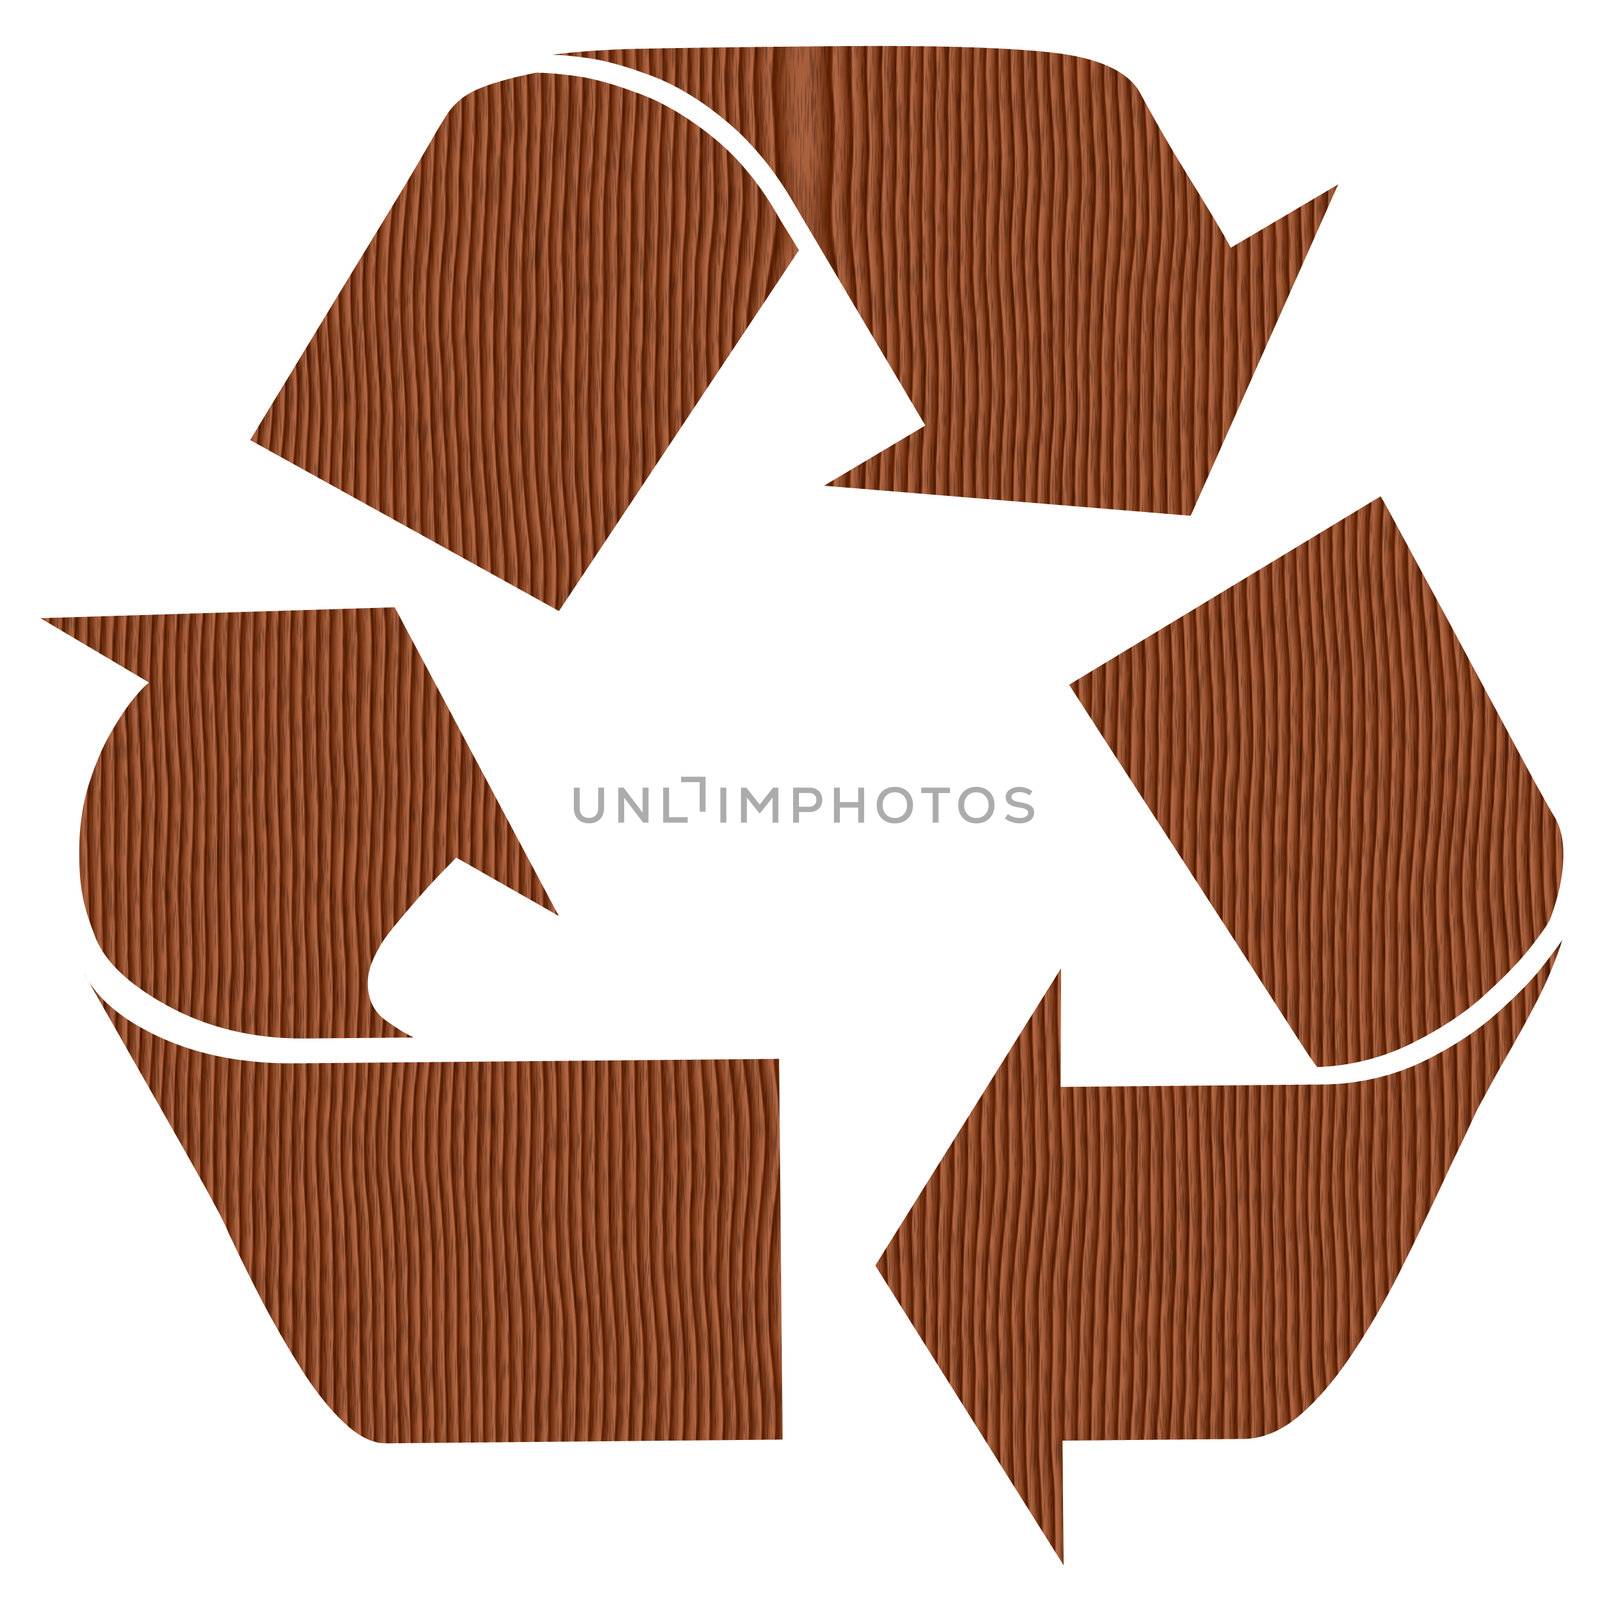 Wooden recycling symbol meant for paper